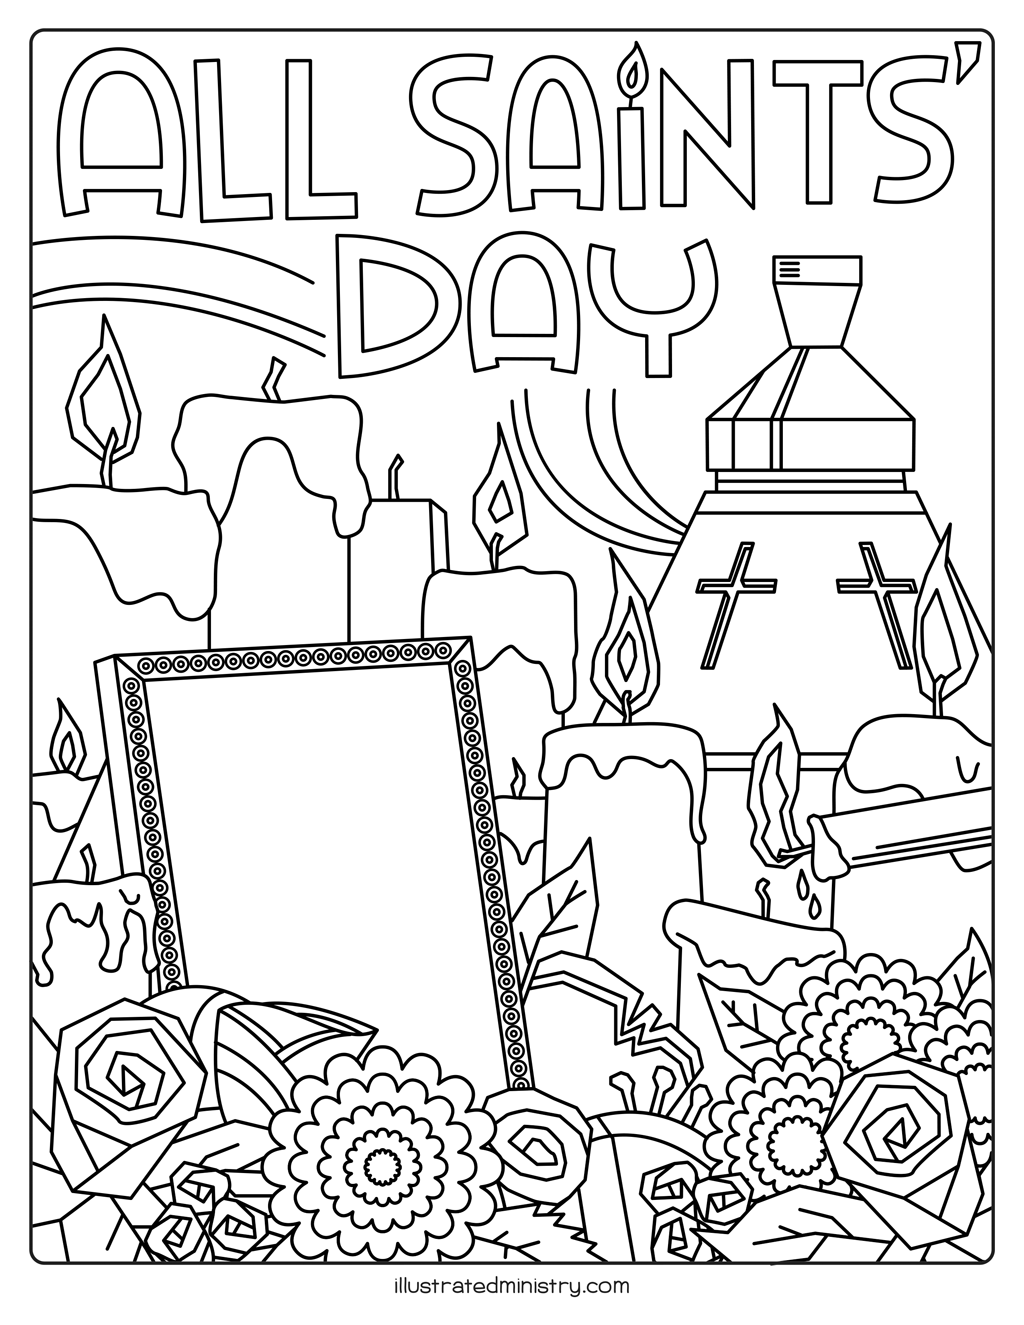 All Saints Coloring Page Sketch Coloring Page